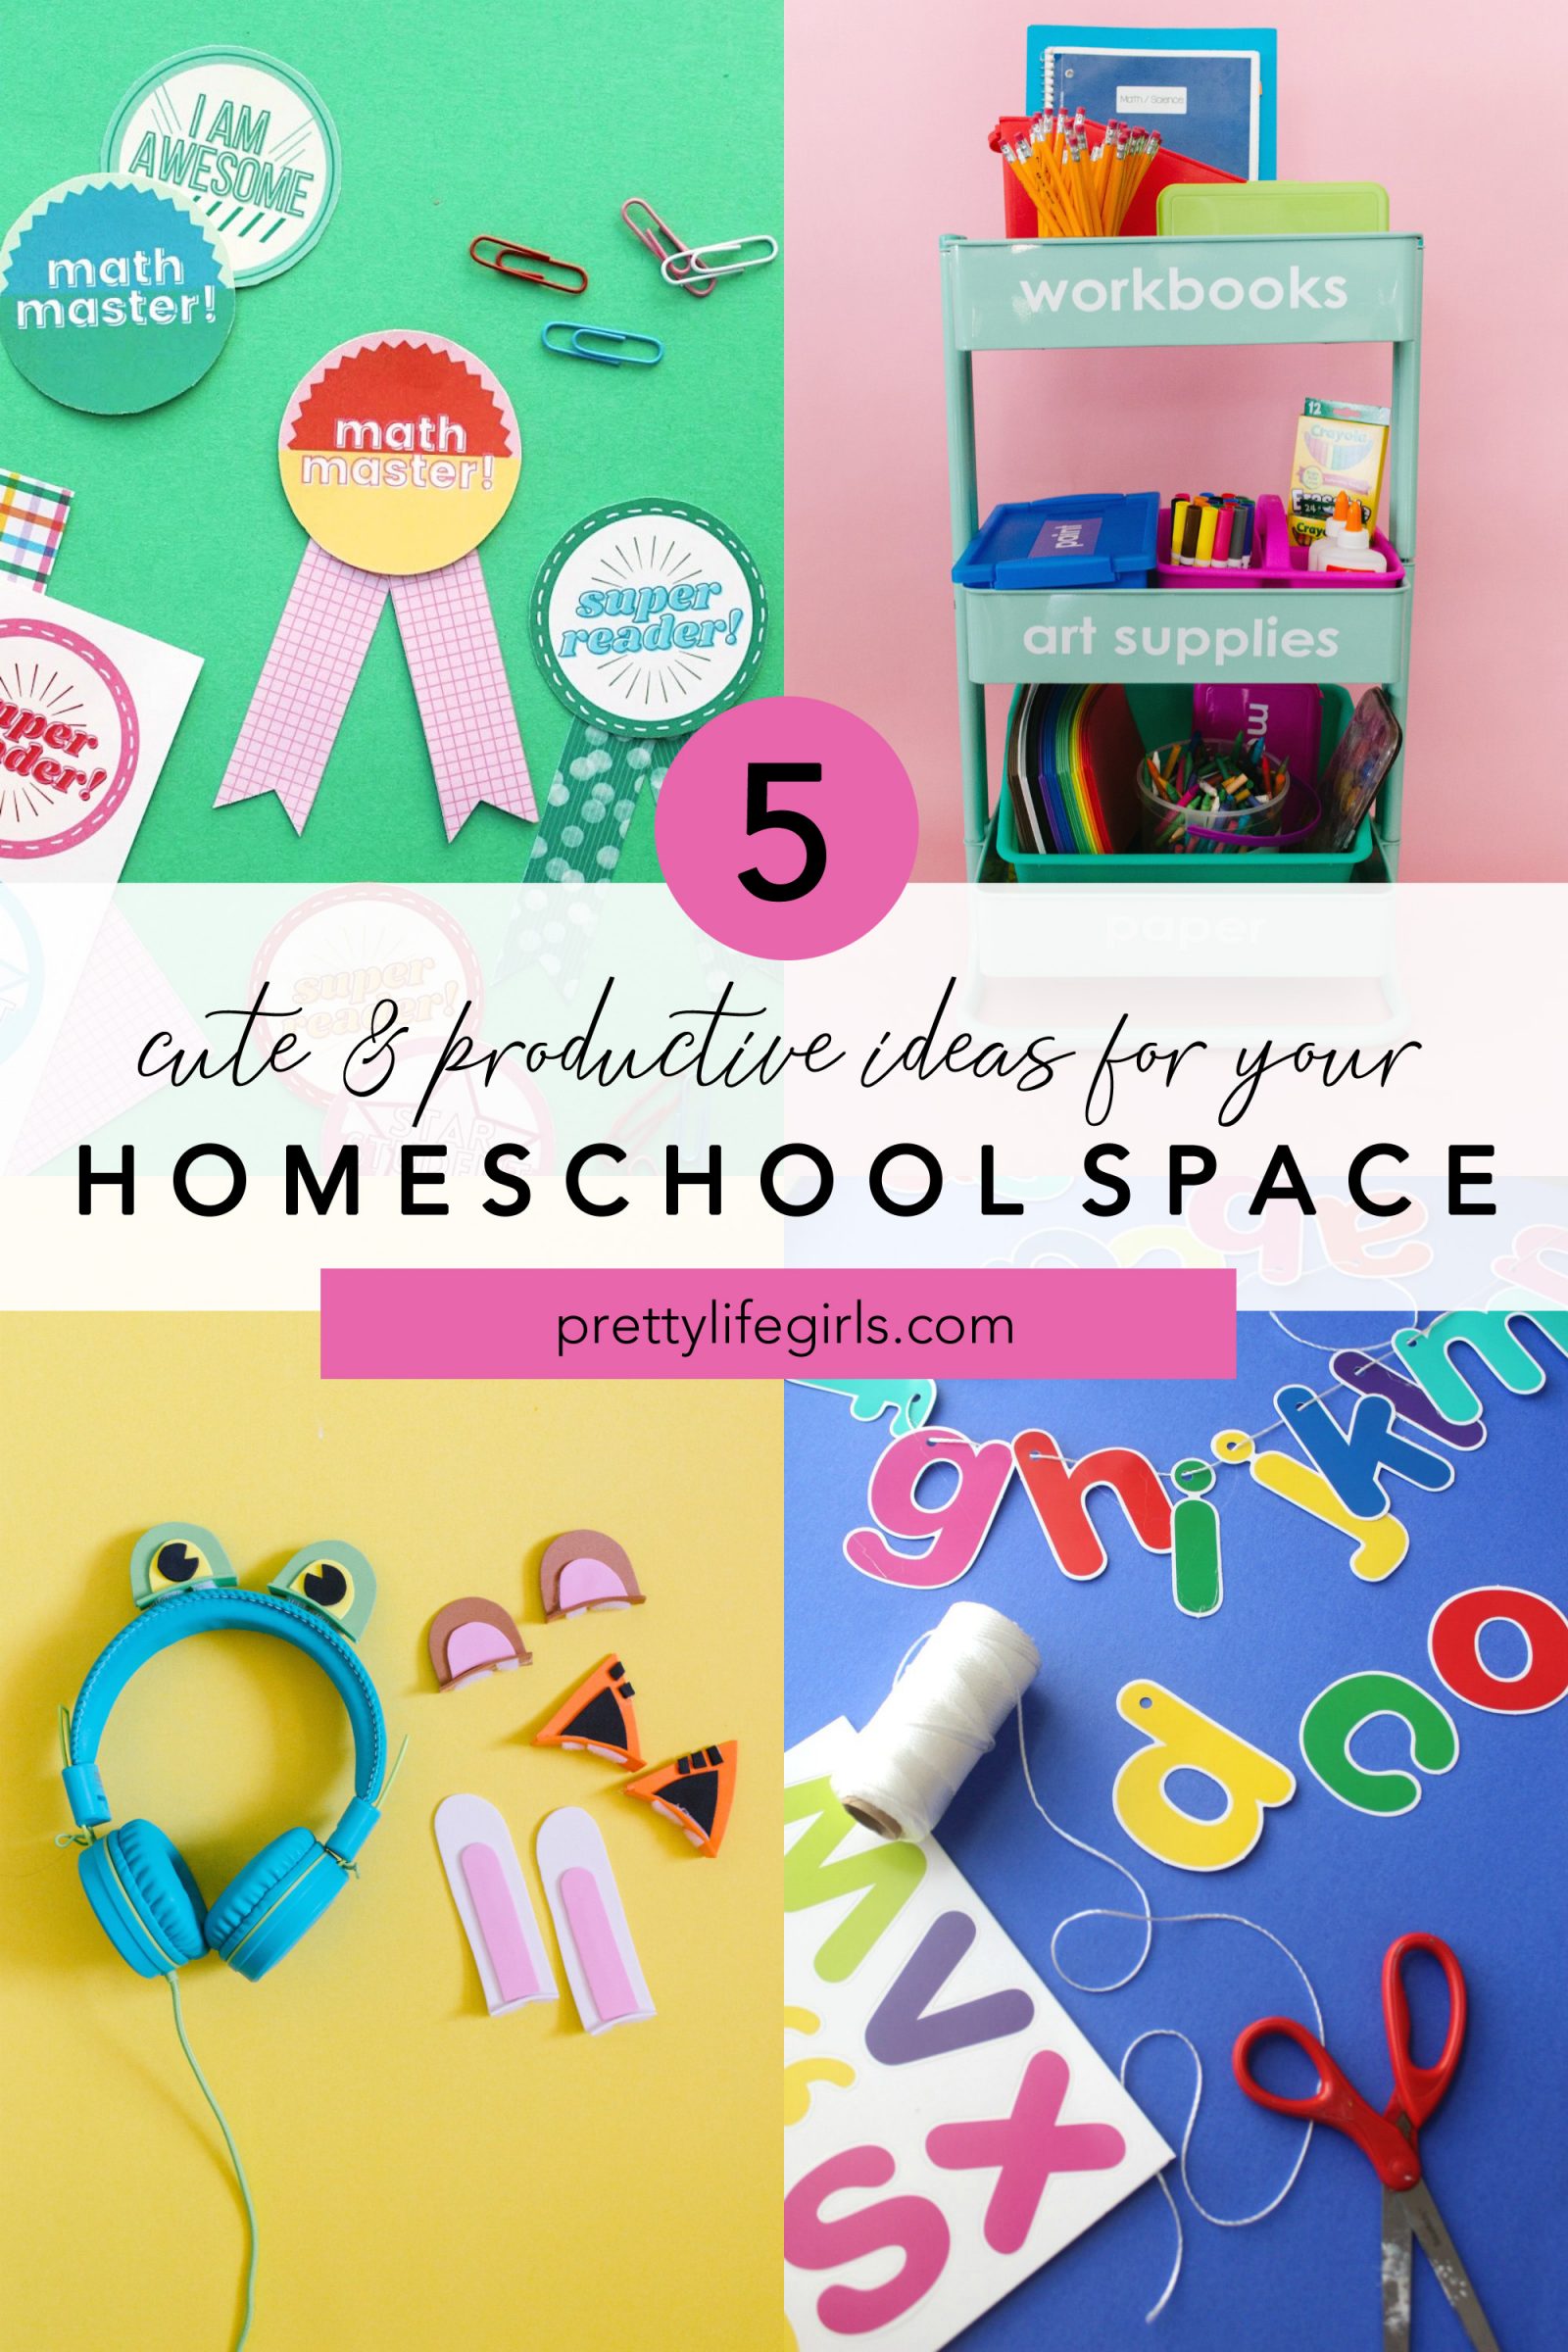 E-Learning Organization: 5 Cute and Productive Homeschool Space Ideas + a tutorial featured by Top US Craft Blog + The Pretty Life Girls